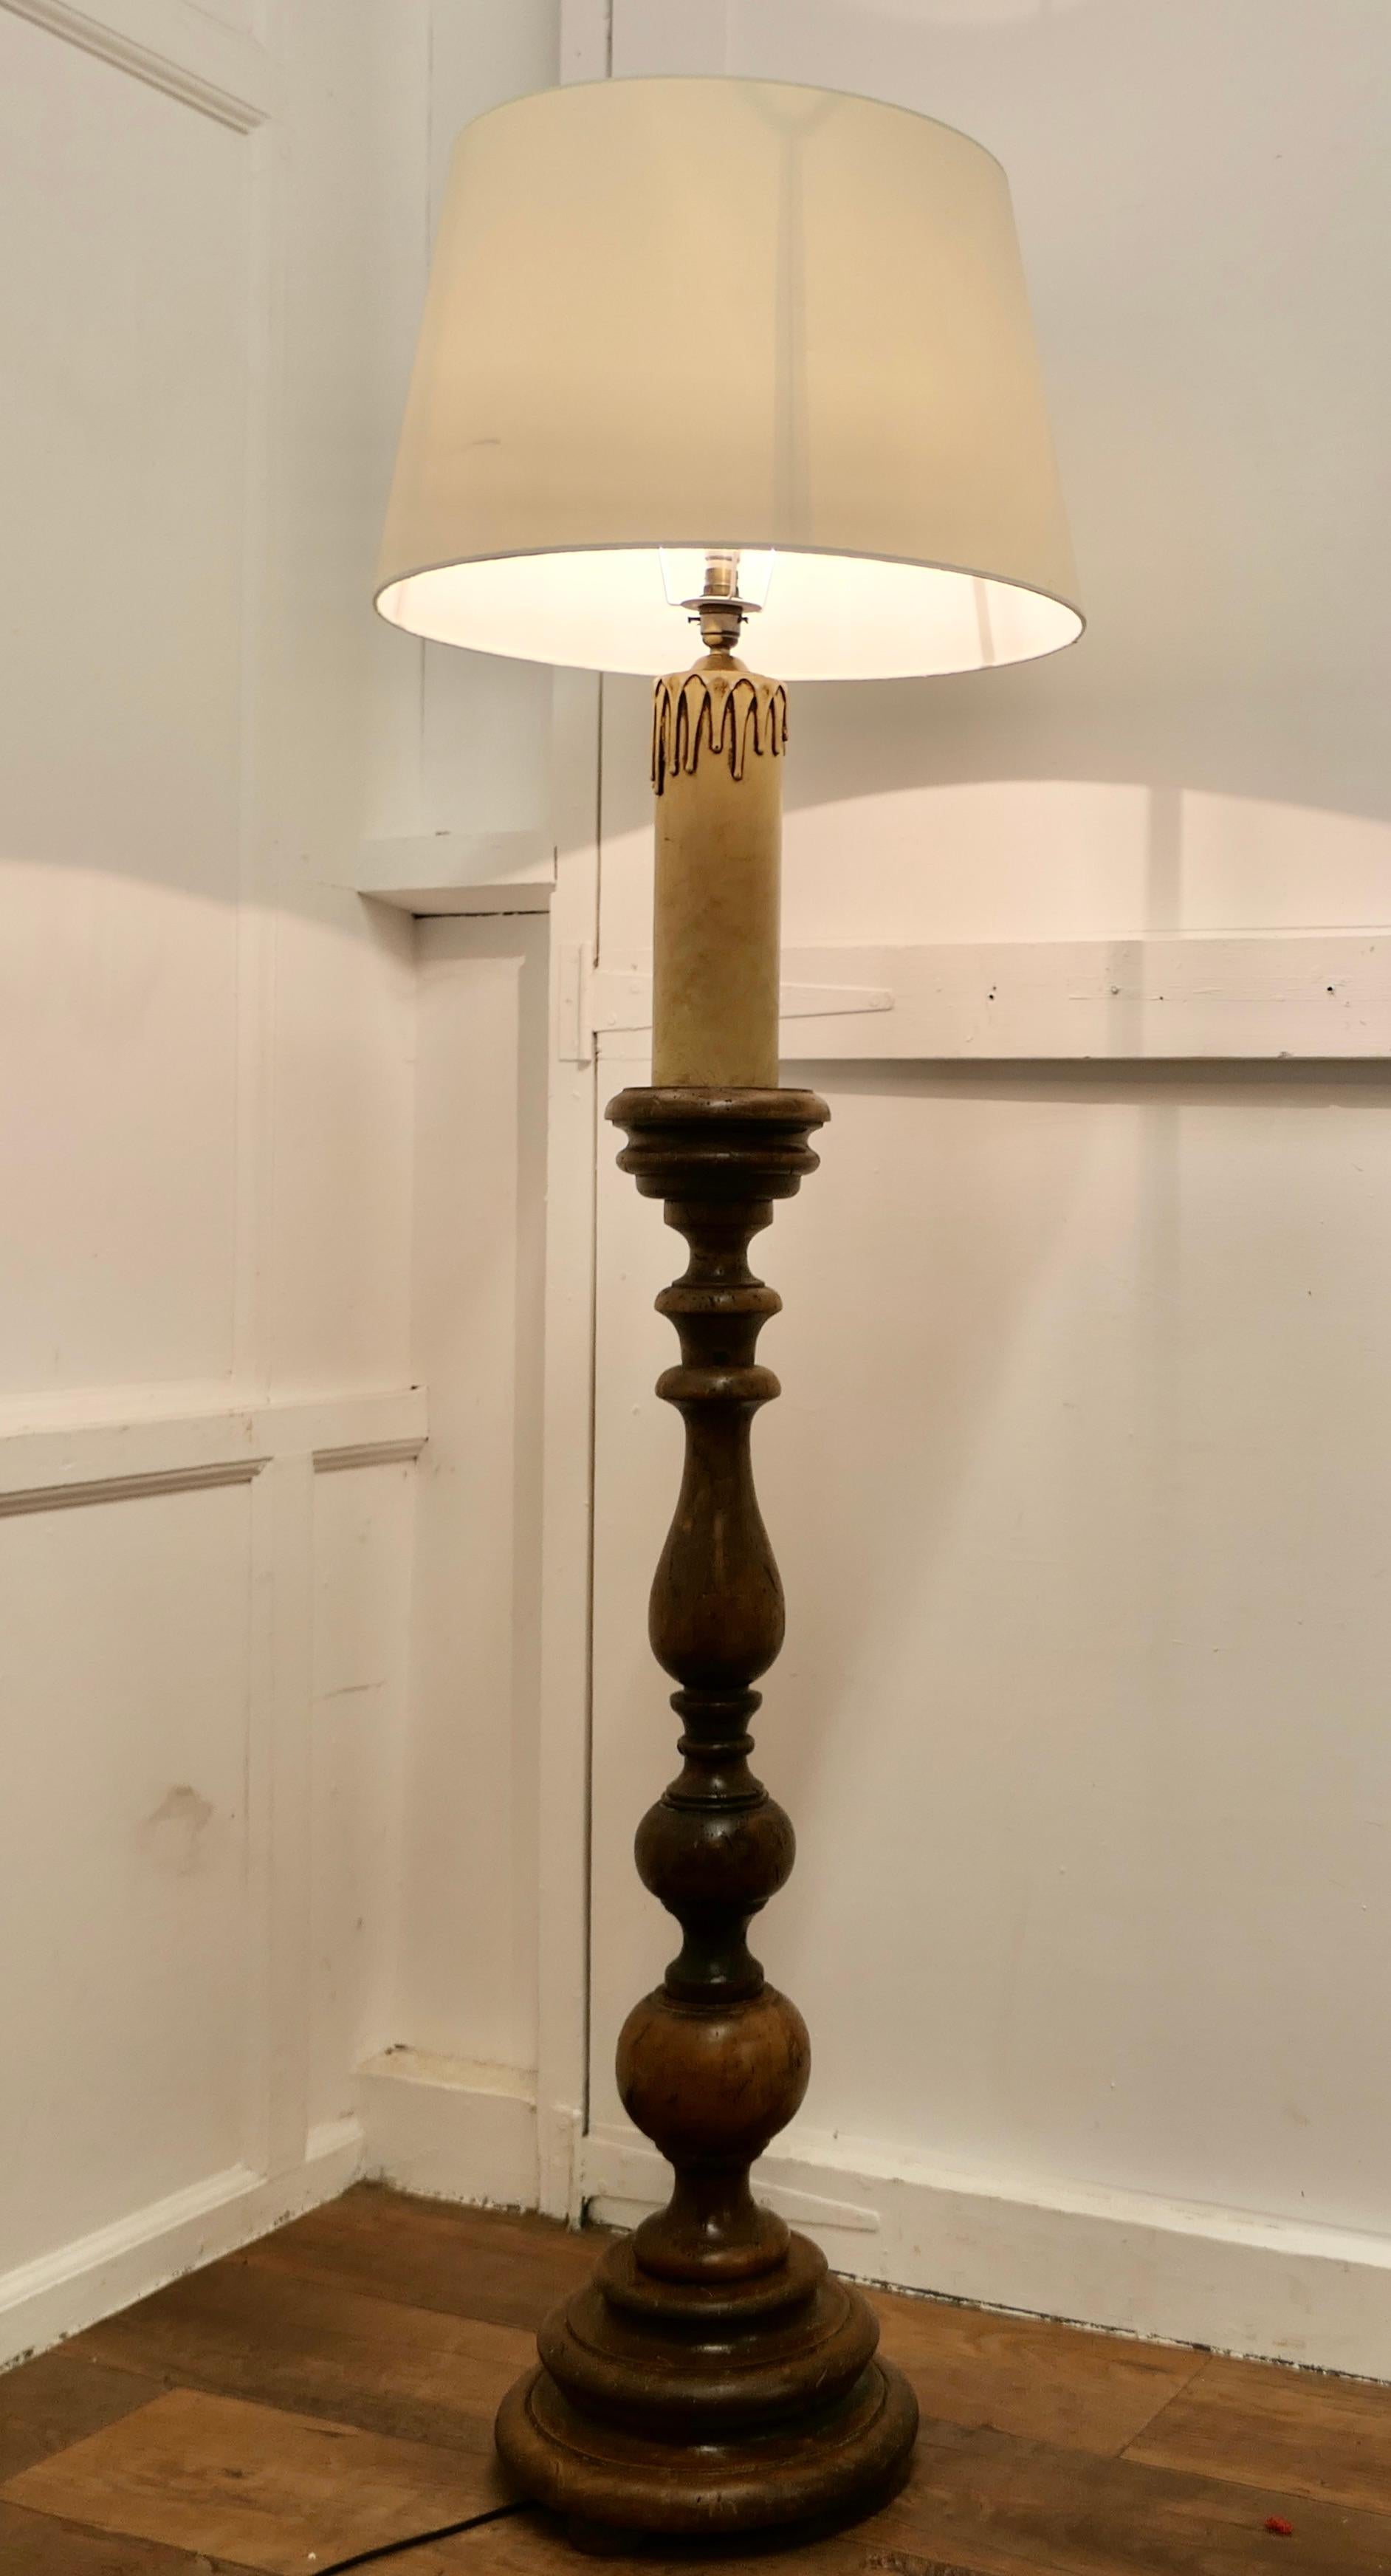 Chunky French Chestnut Standard Floor Lamp   This lamp is a good country piece  4